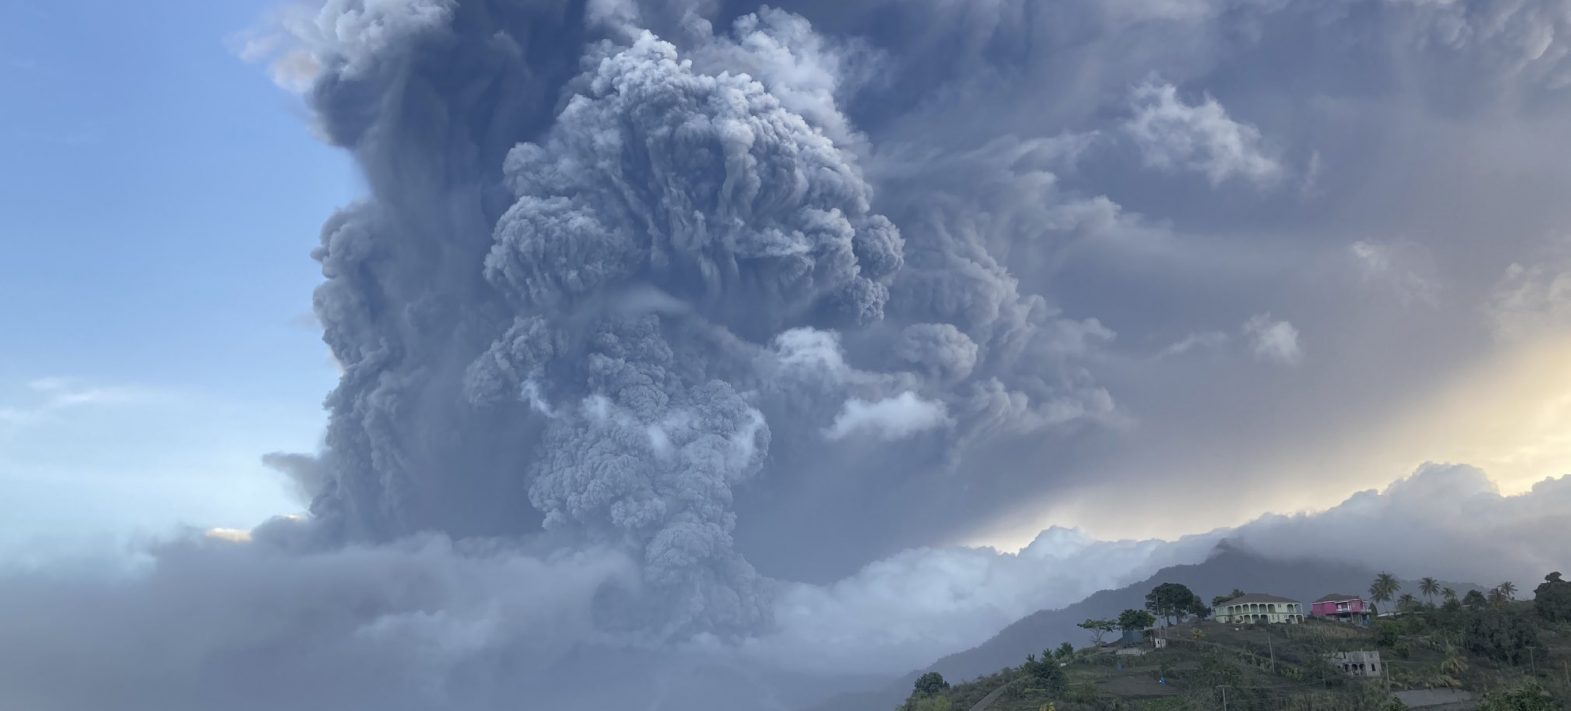 A look back at the Soufrière eruption in Saint Vincent and the Grenadines